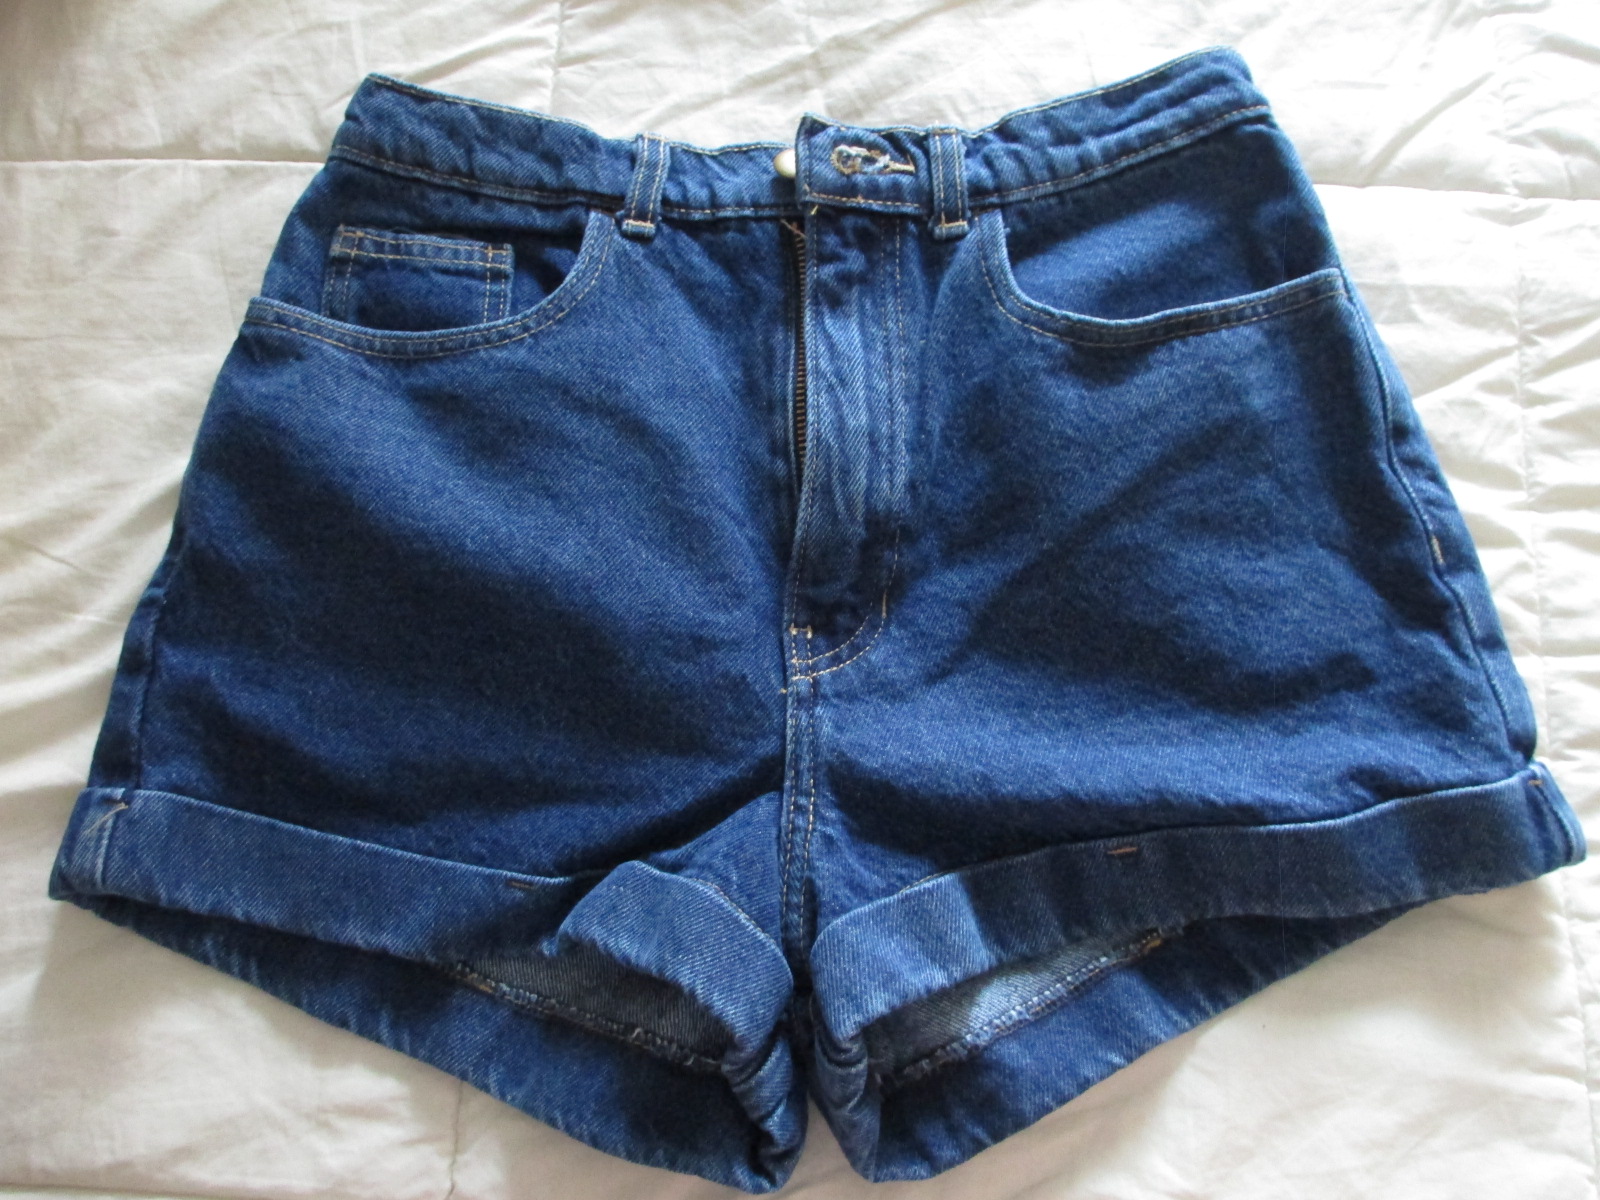 american apparel jeans shorts